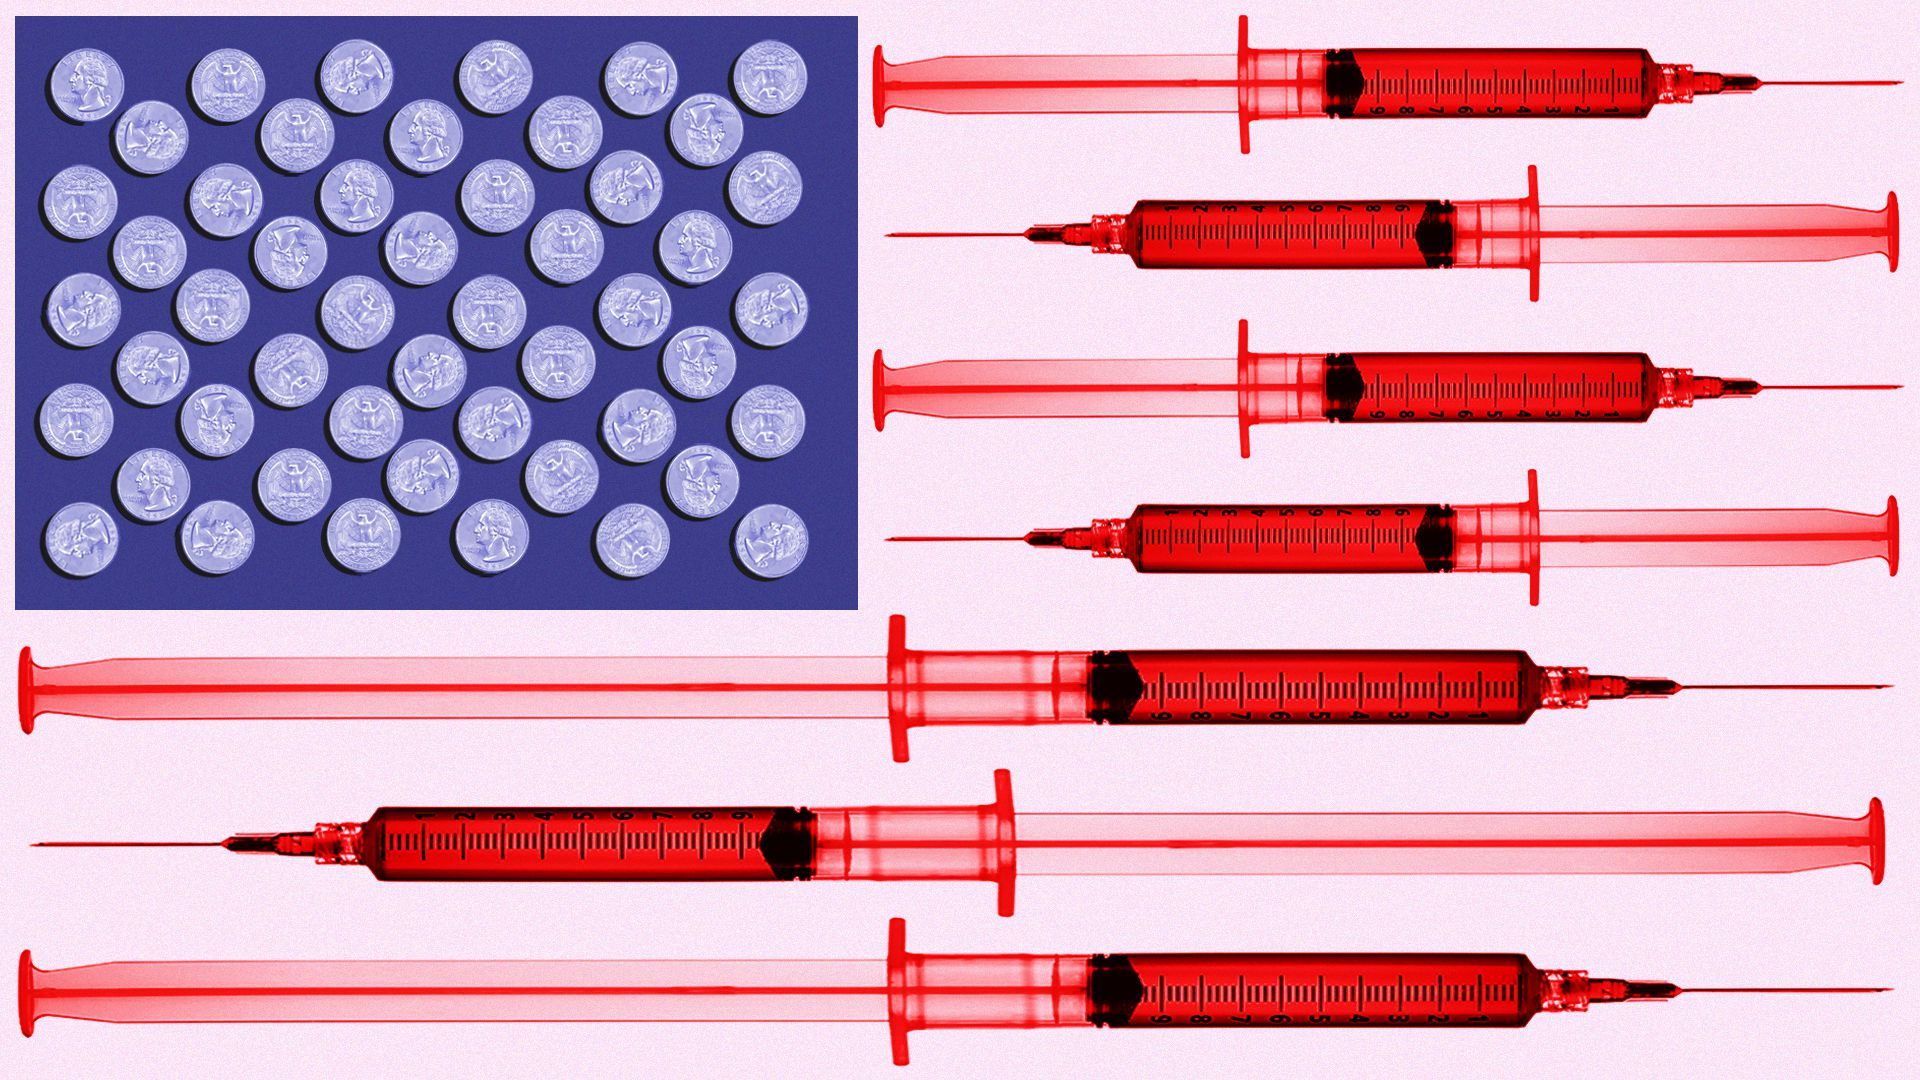 Illustration of an American flag made up of syringes and quarters